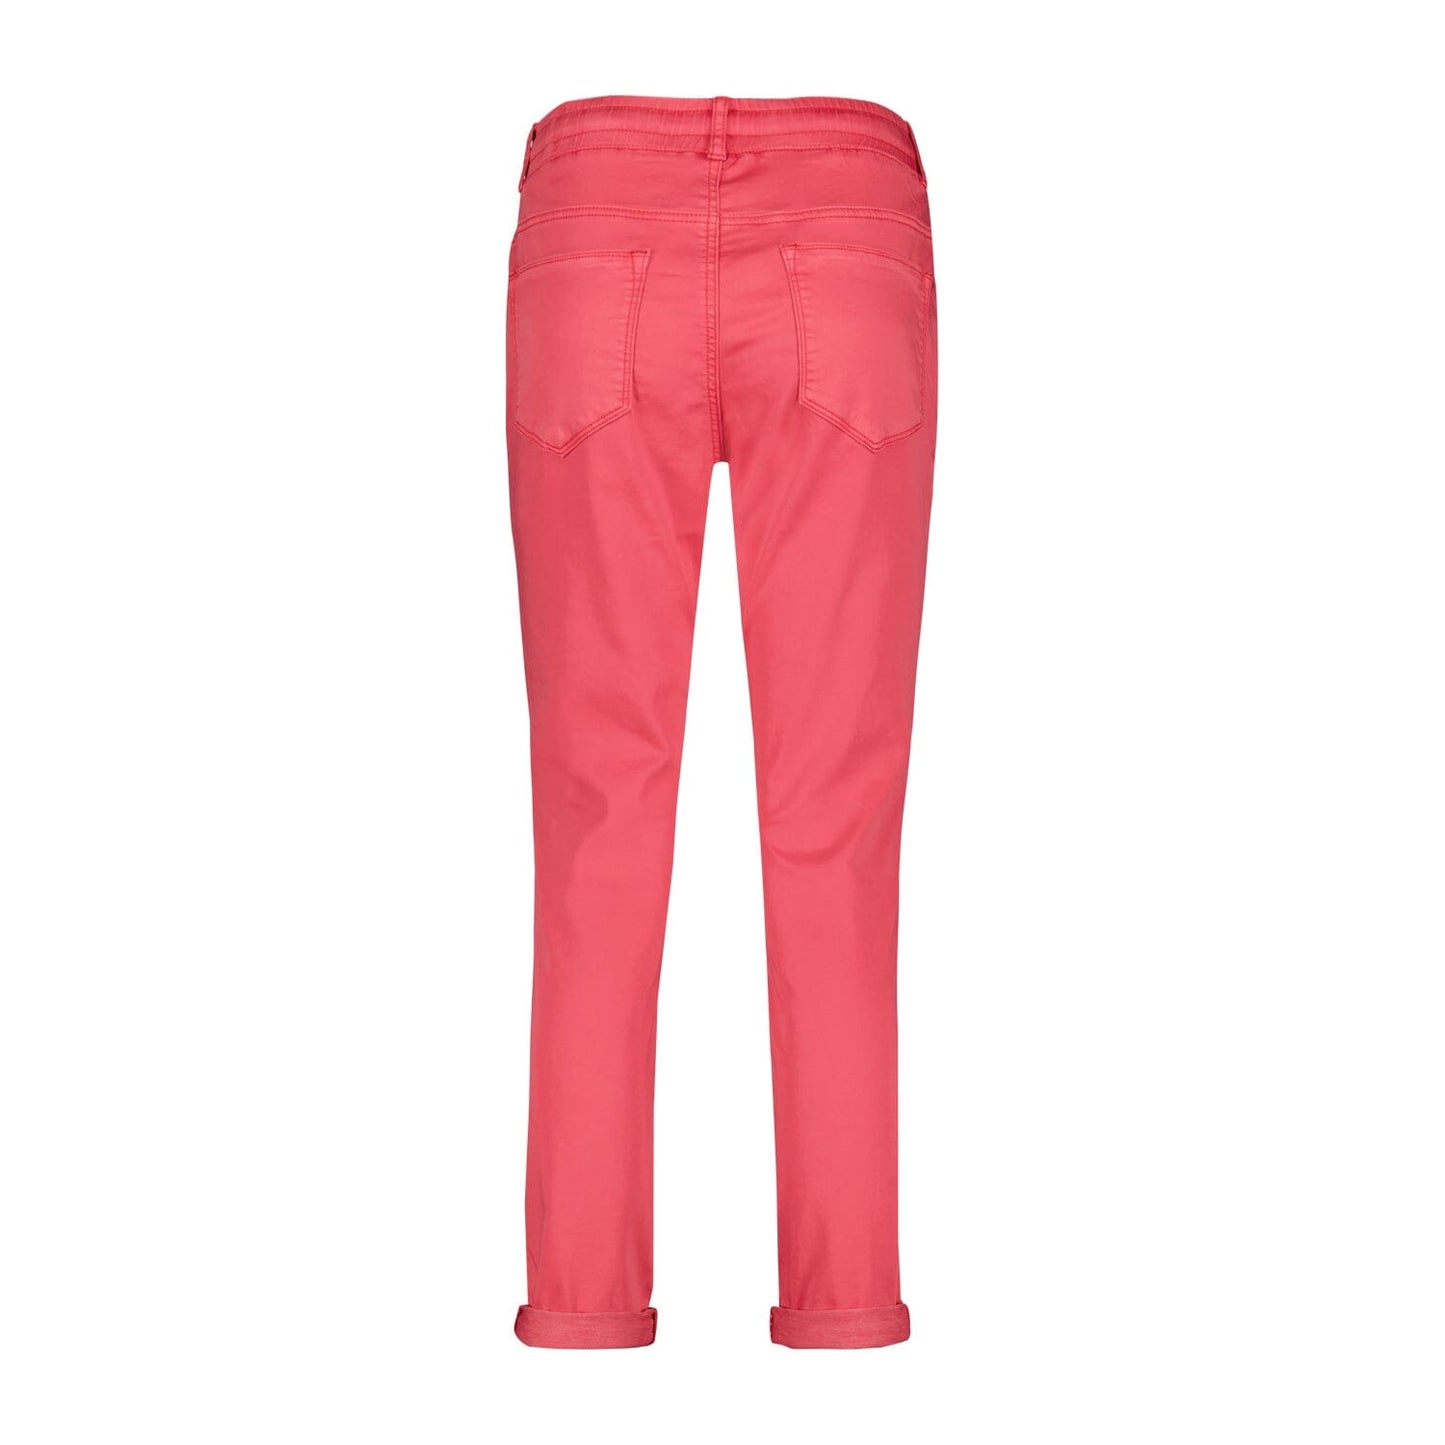 Tessy Jogger Crop Pants | Coral Pants Red Button 